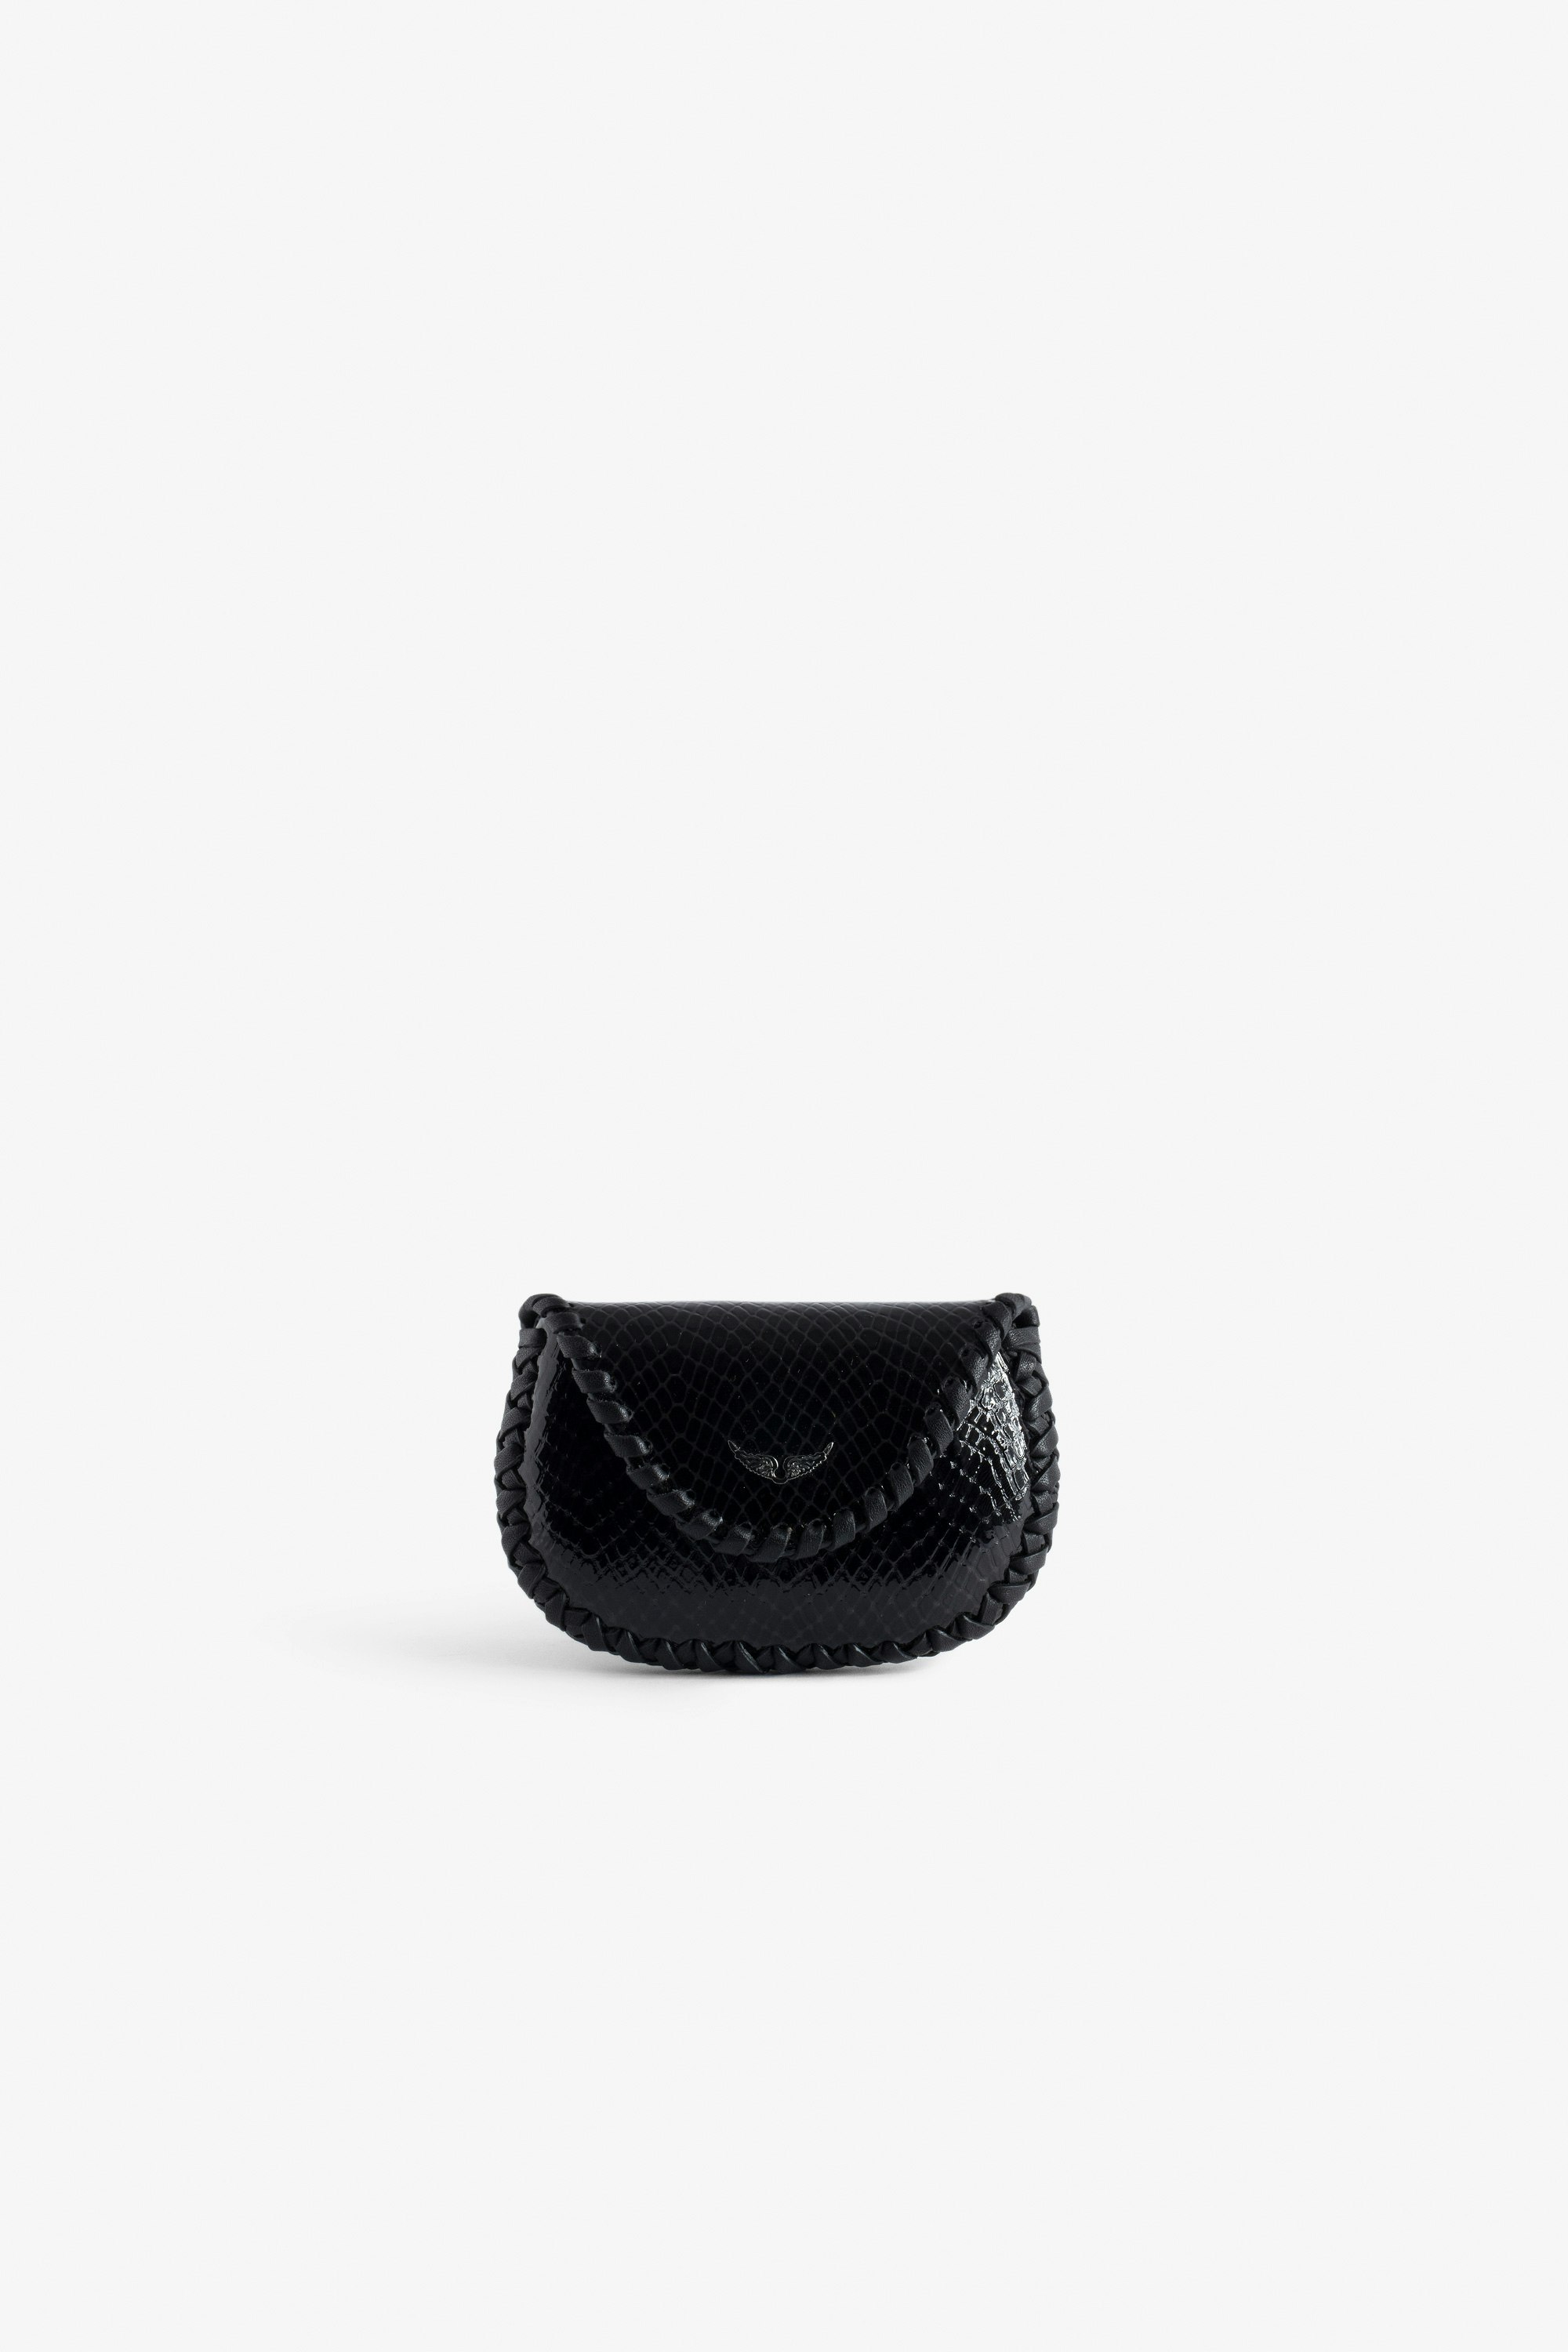 Secret Glossy Wild Embossed Clutch Women’s black python-effect patent leather clutch with wings charm and ring.